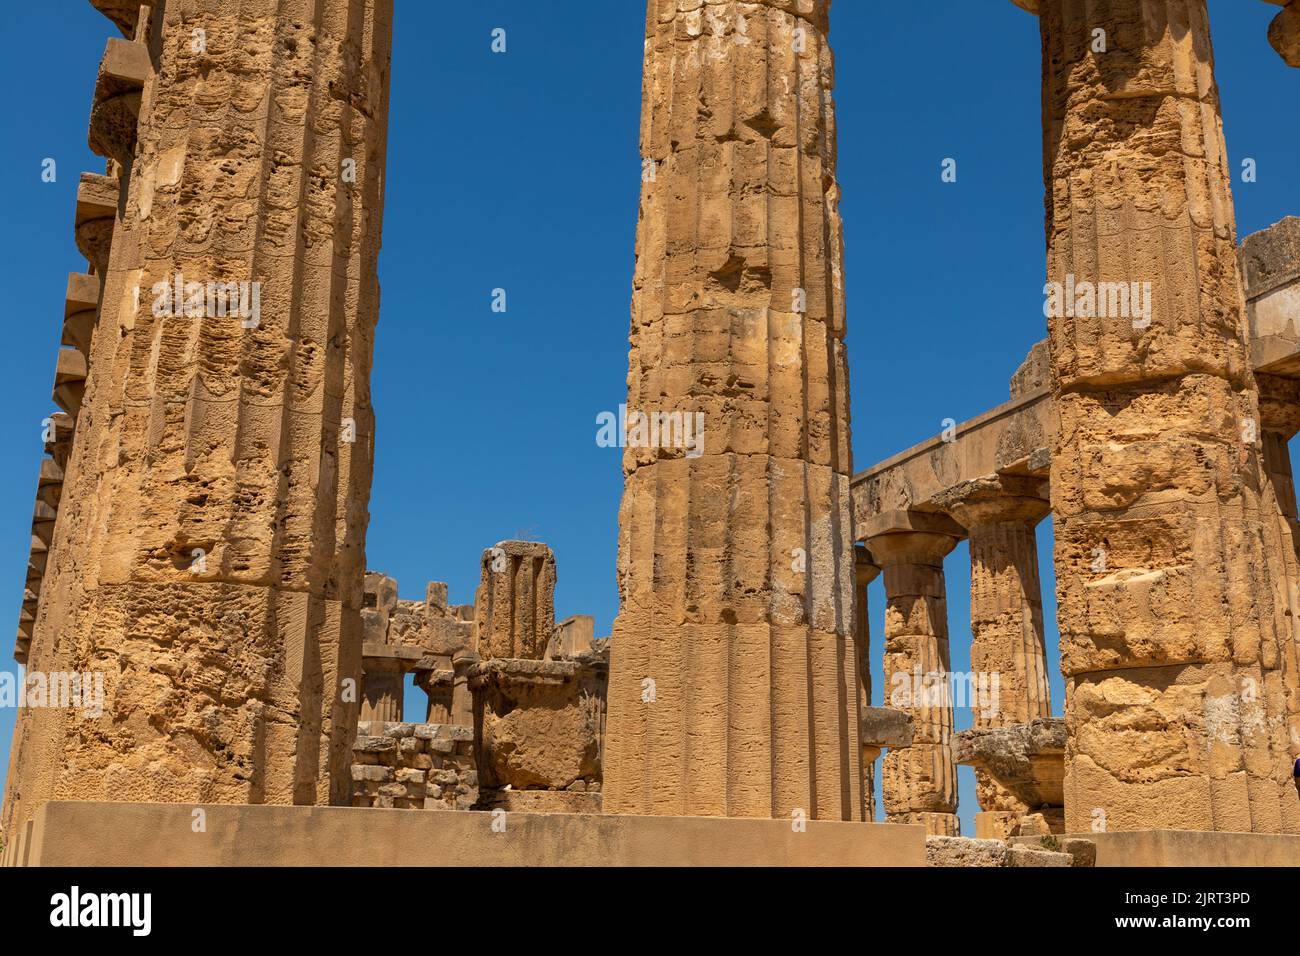 A view of the Temple of Juno, a Greek temple of the Doric order in the Valley of the Temples in Agrigento, Sicily, Italy Stock Photo